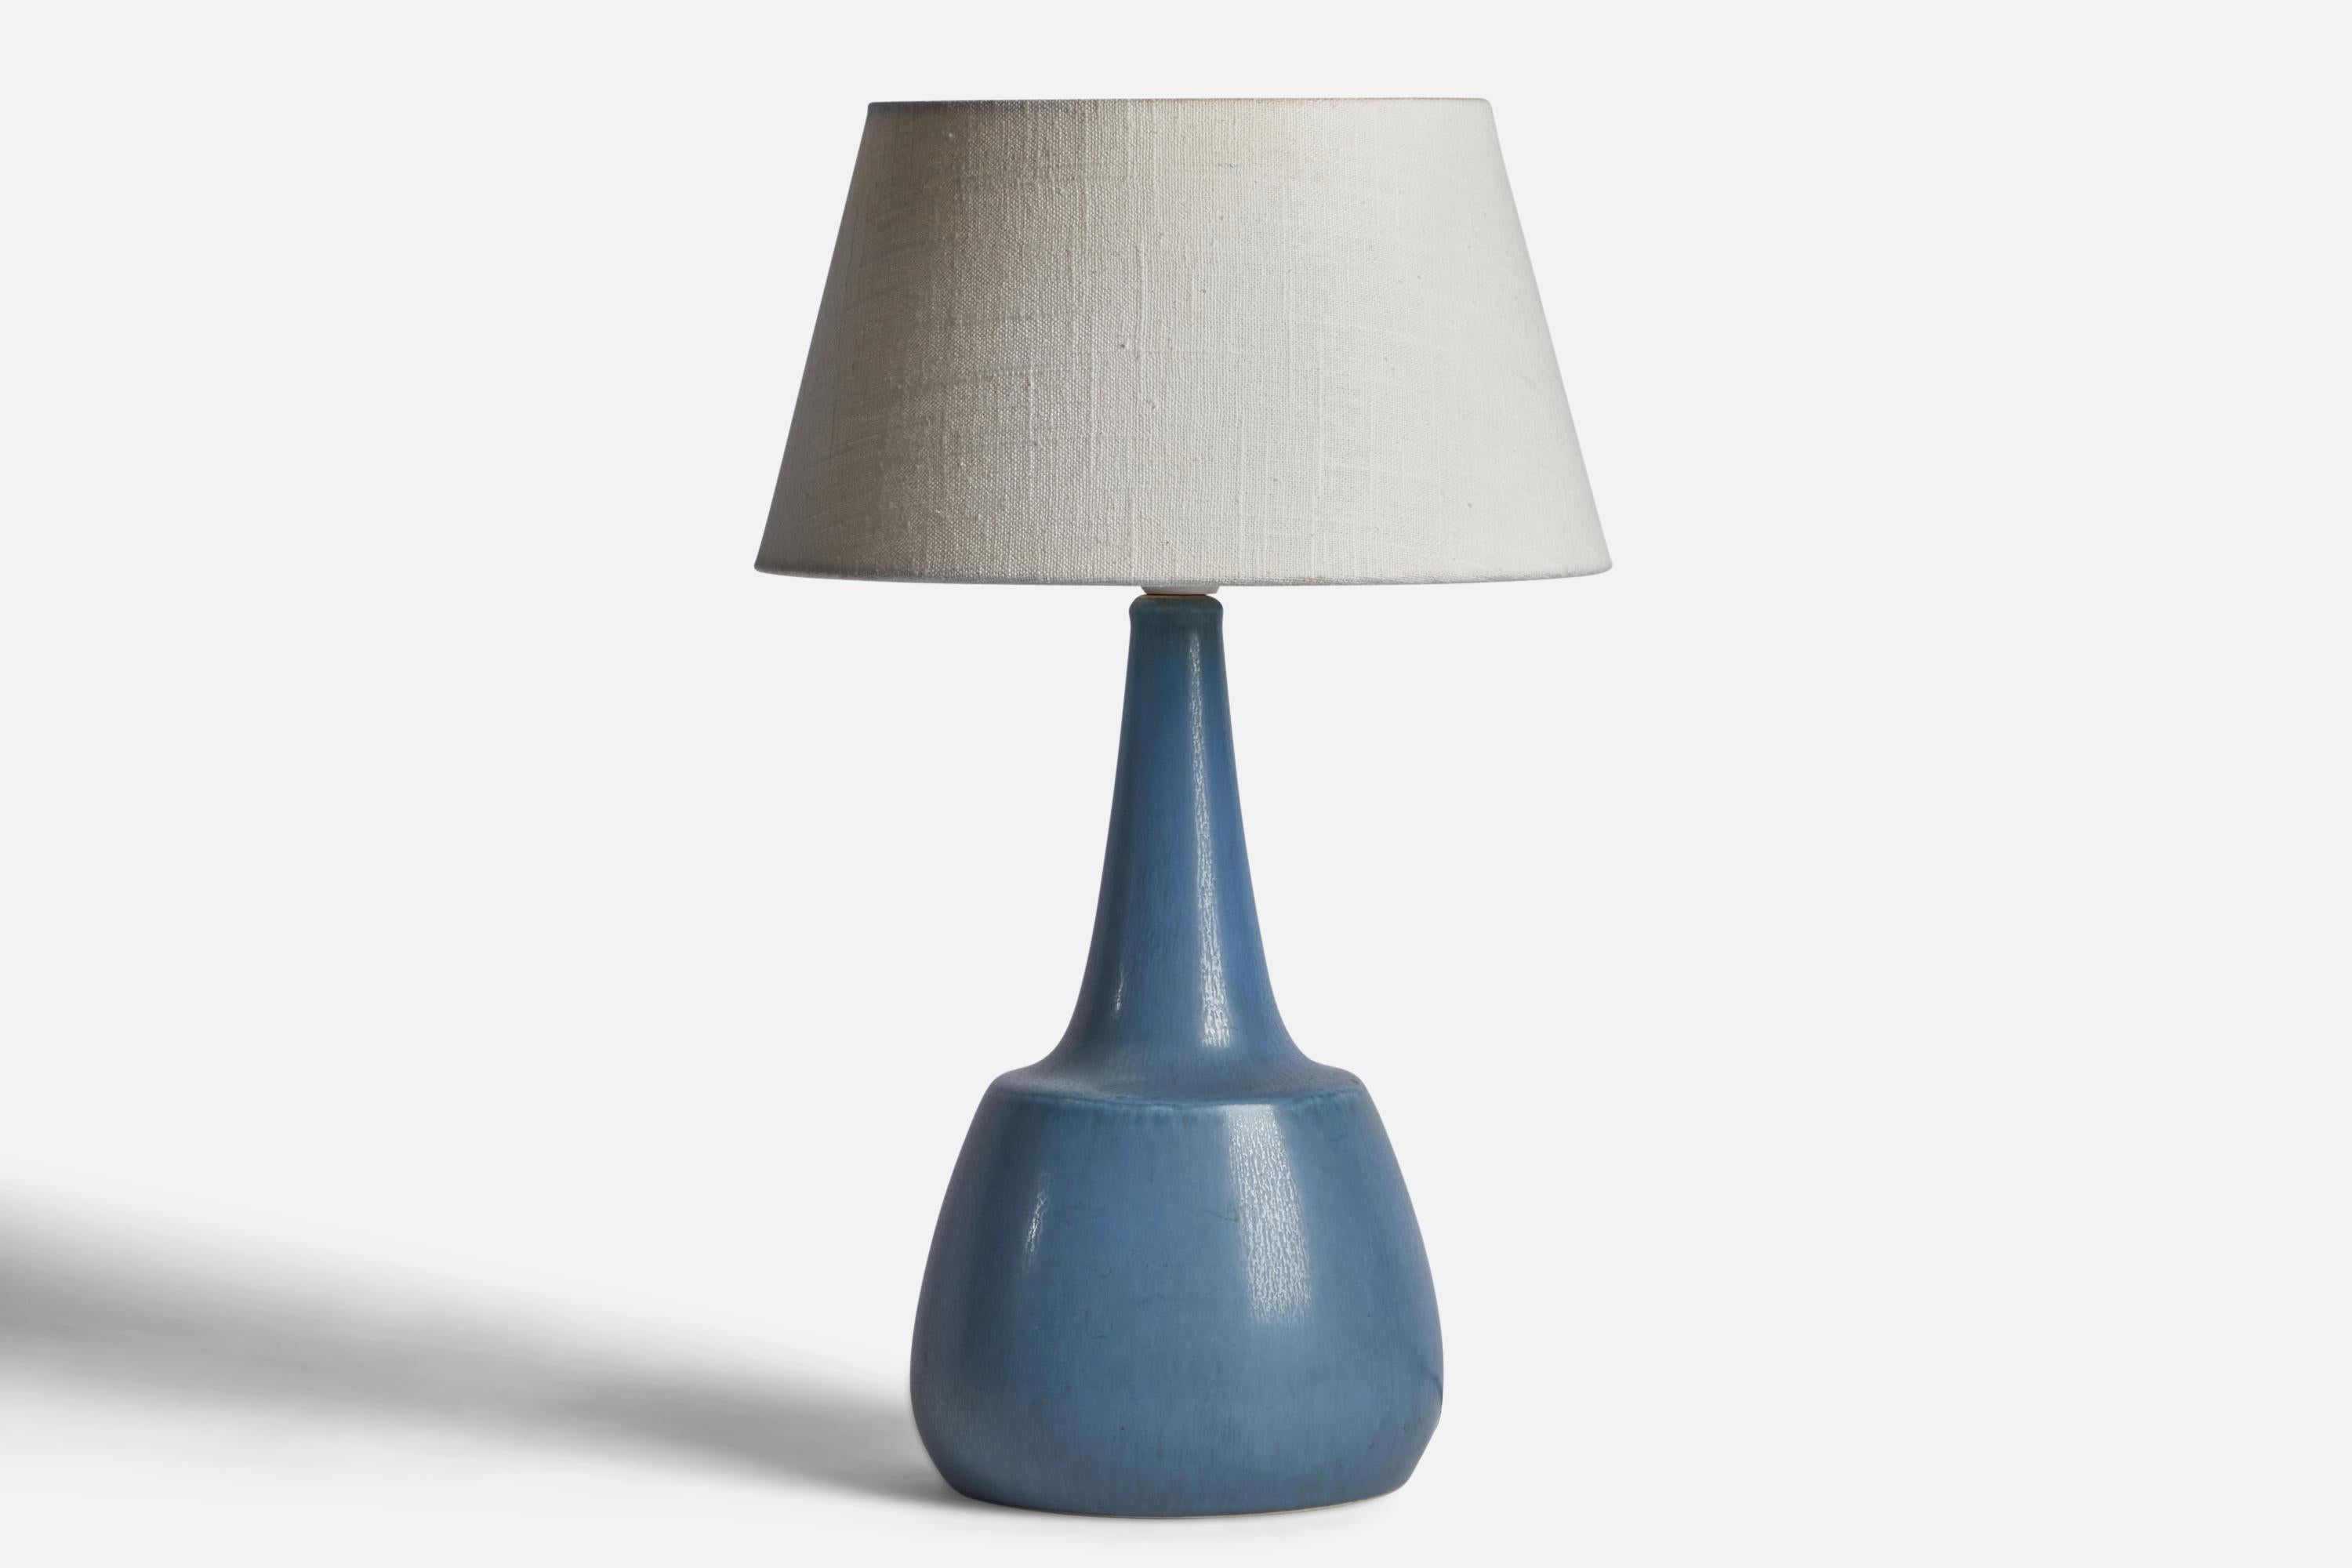 A blue-glazed stoneware table lamp designed by Per & Annelise Linneman-Schmidt and produced by Palshus, Denmark, 1960s.

Dimensions of Lamp (inches): 13.15” H x 6.3” Diameter
Dimensions of Shade (inches): 7” Top Diameter x 10” Bottom Diameter x 5.5”